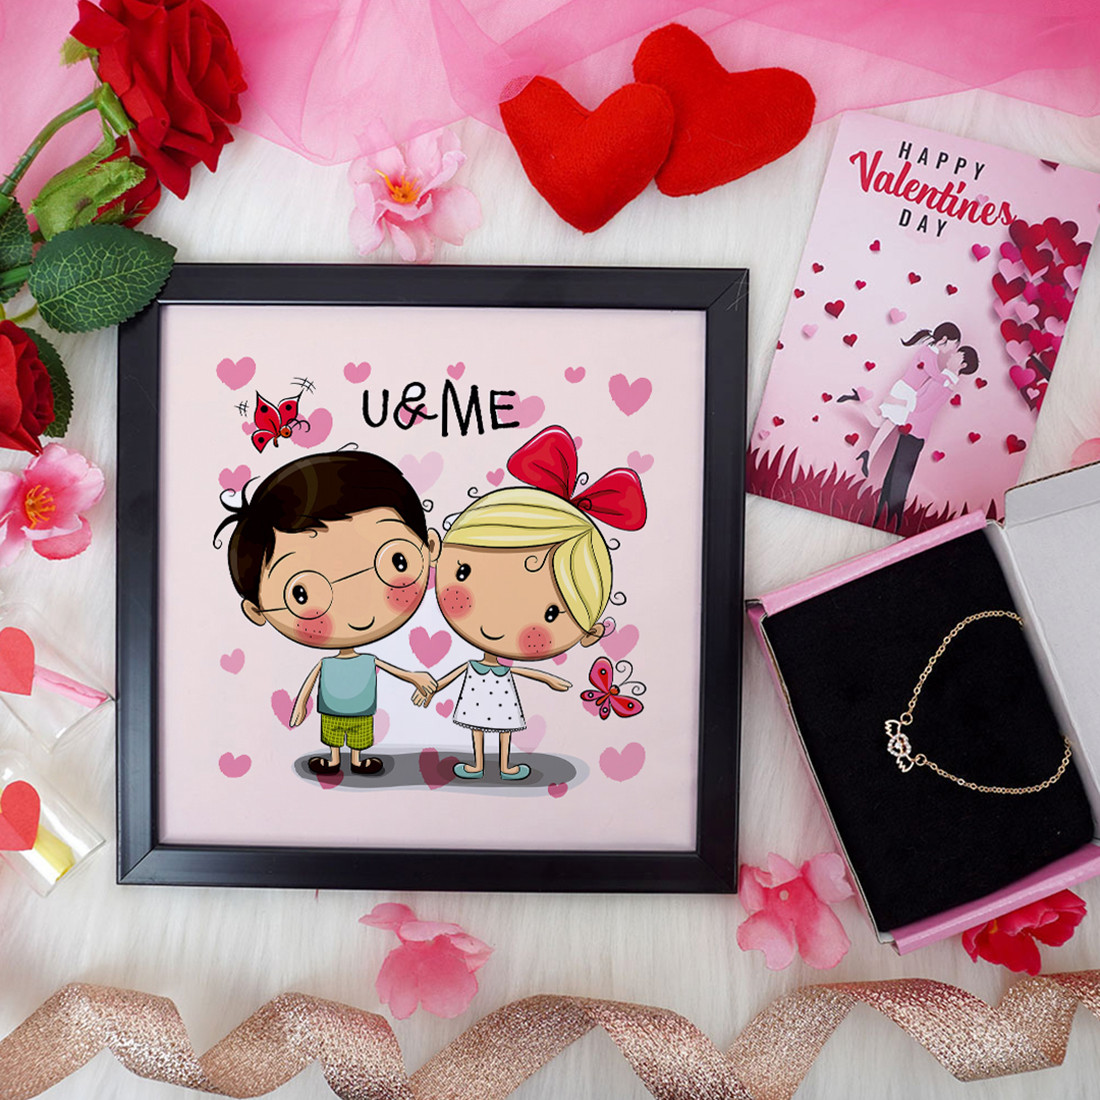 U & Me Valentine Gift Set | Valentine's Day Gifts for Girlfriend | Valentine Gift for Wife | Women's Pendant/Pendant for Girl/Greeting Card | Photo Frame (8x8 Inches)